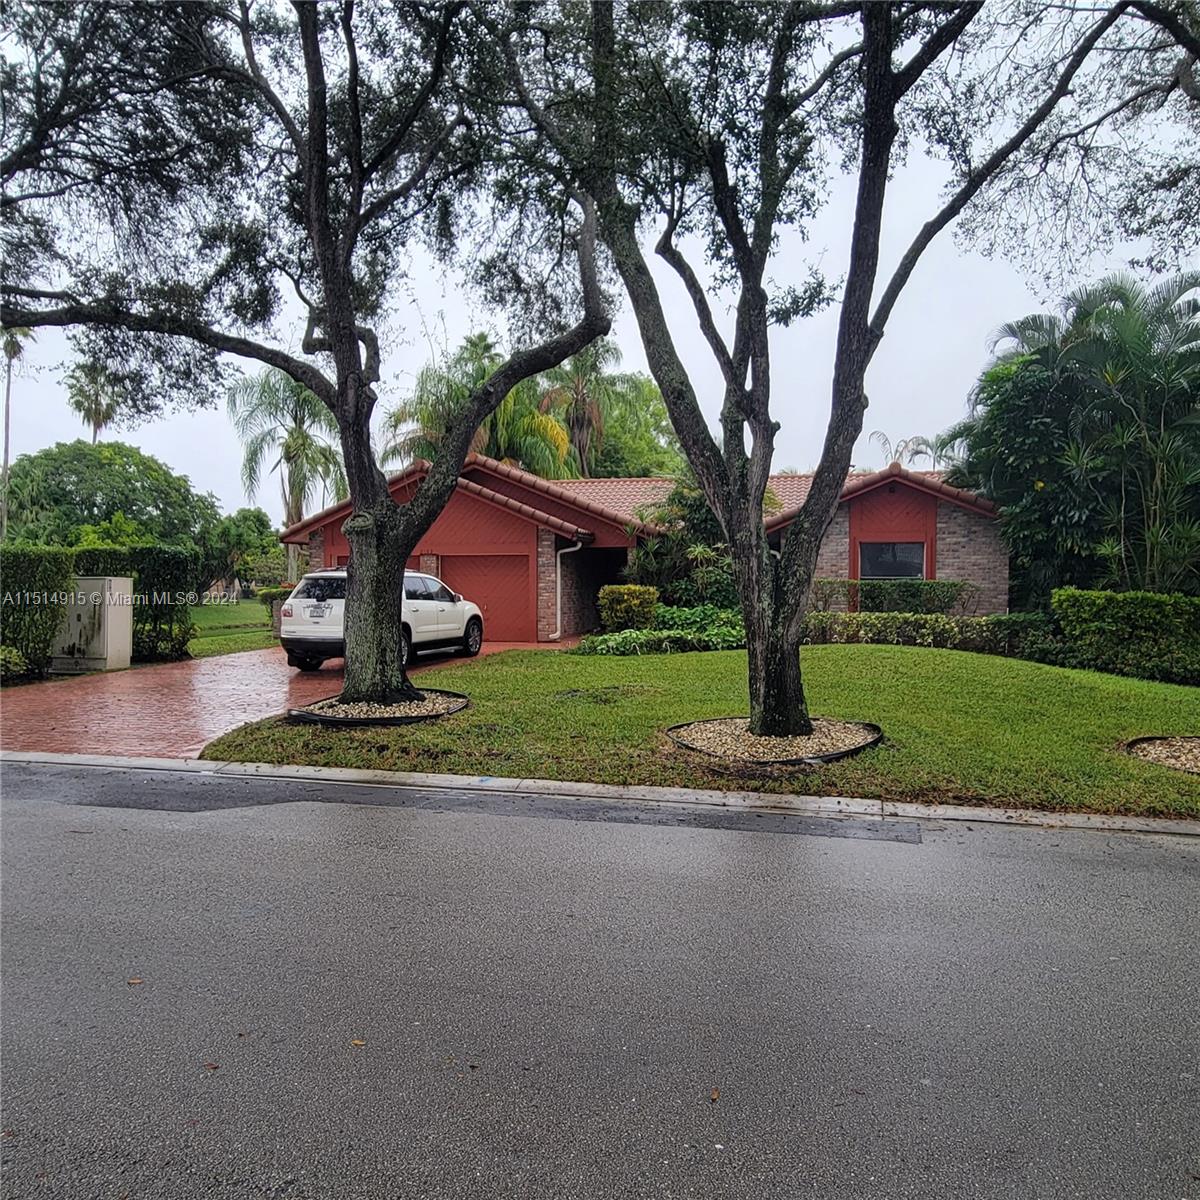 1533 Nw 111th Ave, Coral Springs, Broward County, Florida - 4 Bedrooms  
2 Bathrooms - 